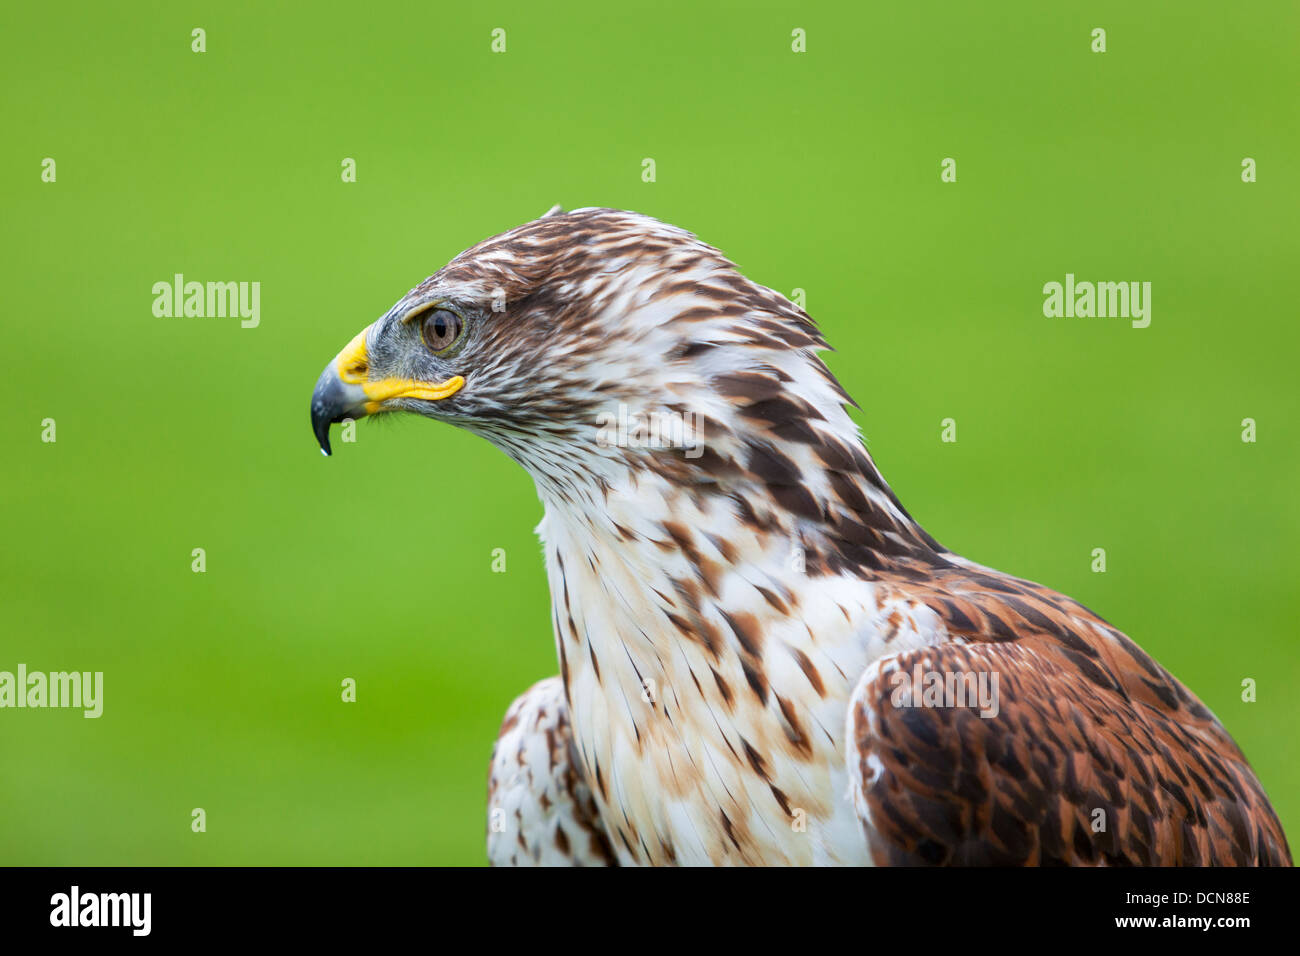 Head and shoulder portrait of a Ferruginous Hawk against a natural green background. Stock Photo